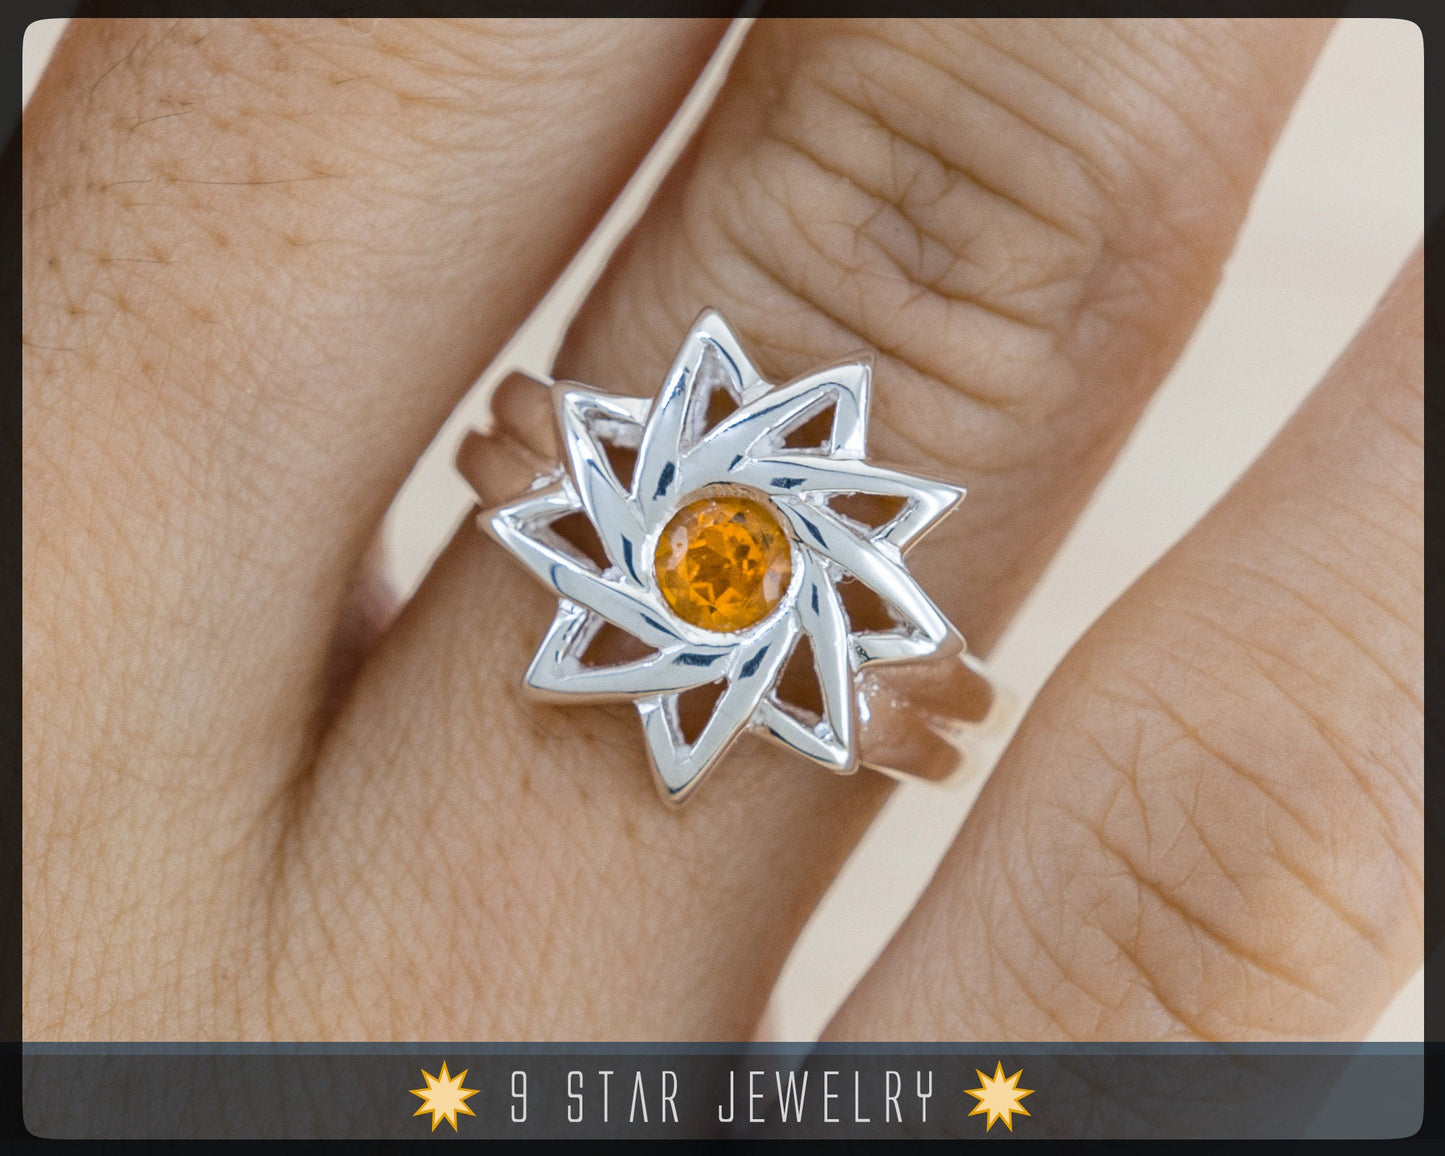 Citrine - Sterling Silver 9 Star Baha'i Ring with genuine gemstone - (Limited Edition)